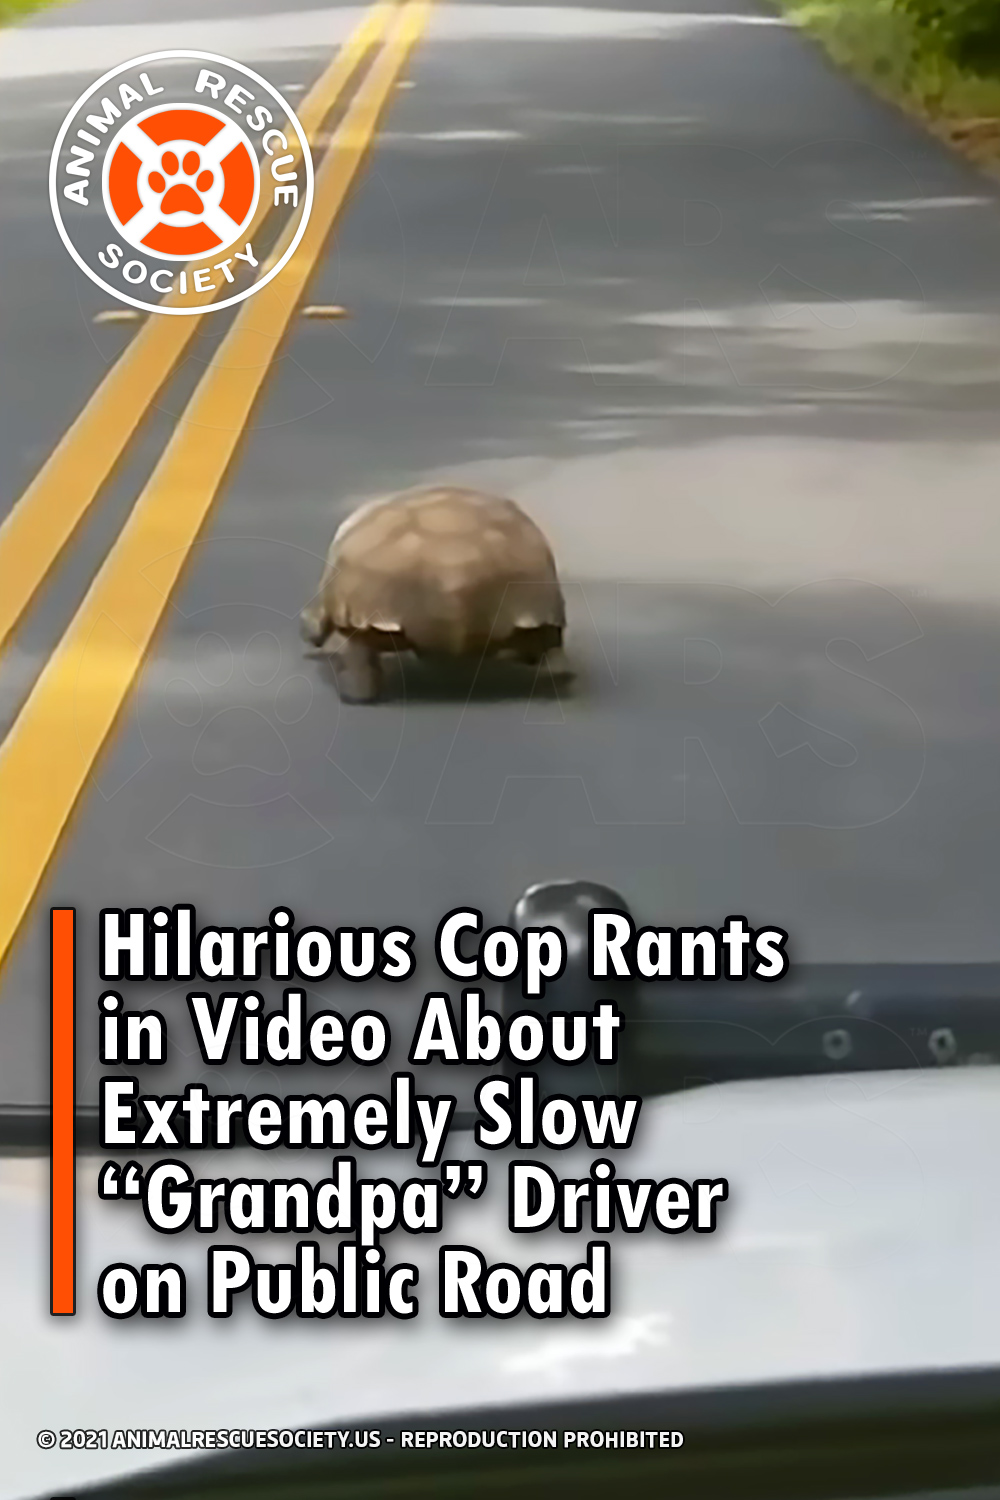 Hilarious Cop Rants in Video About Extremely Slow “Grandpa” Driver on Public Road